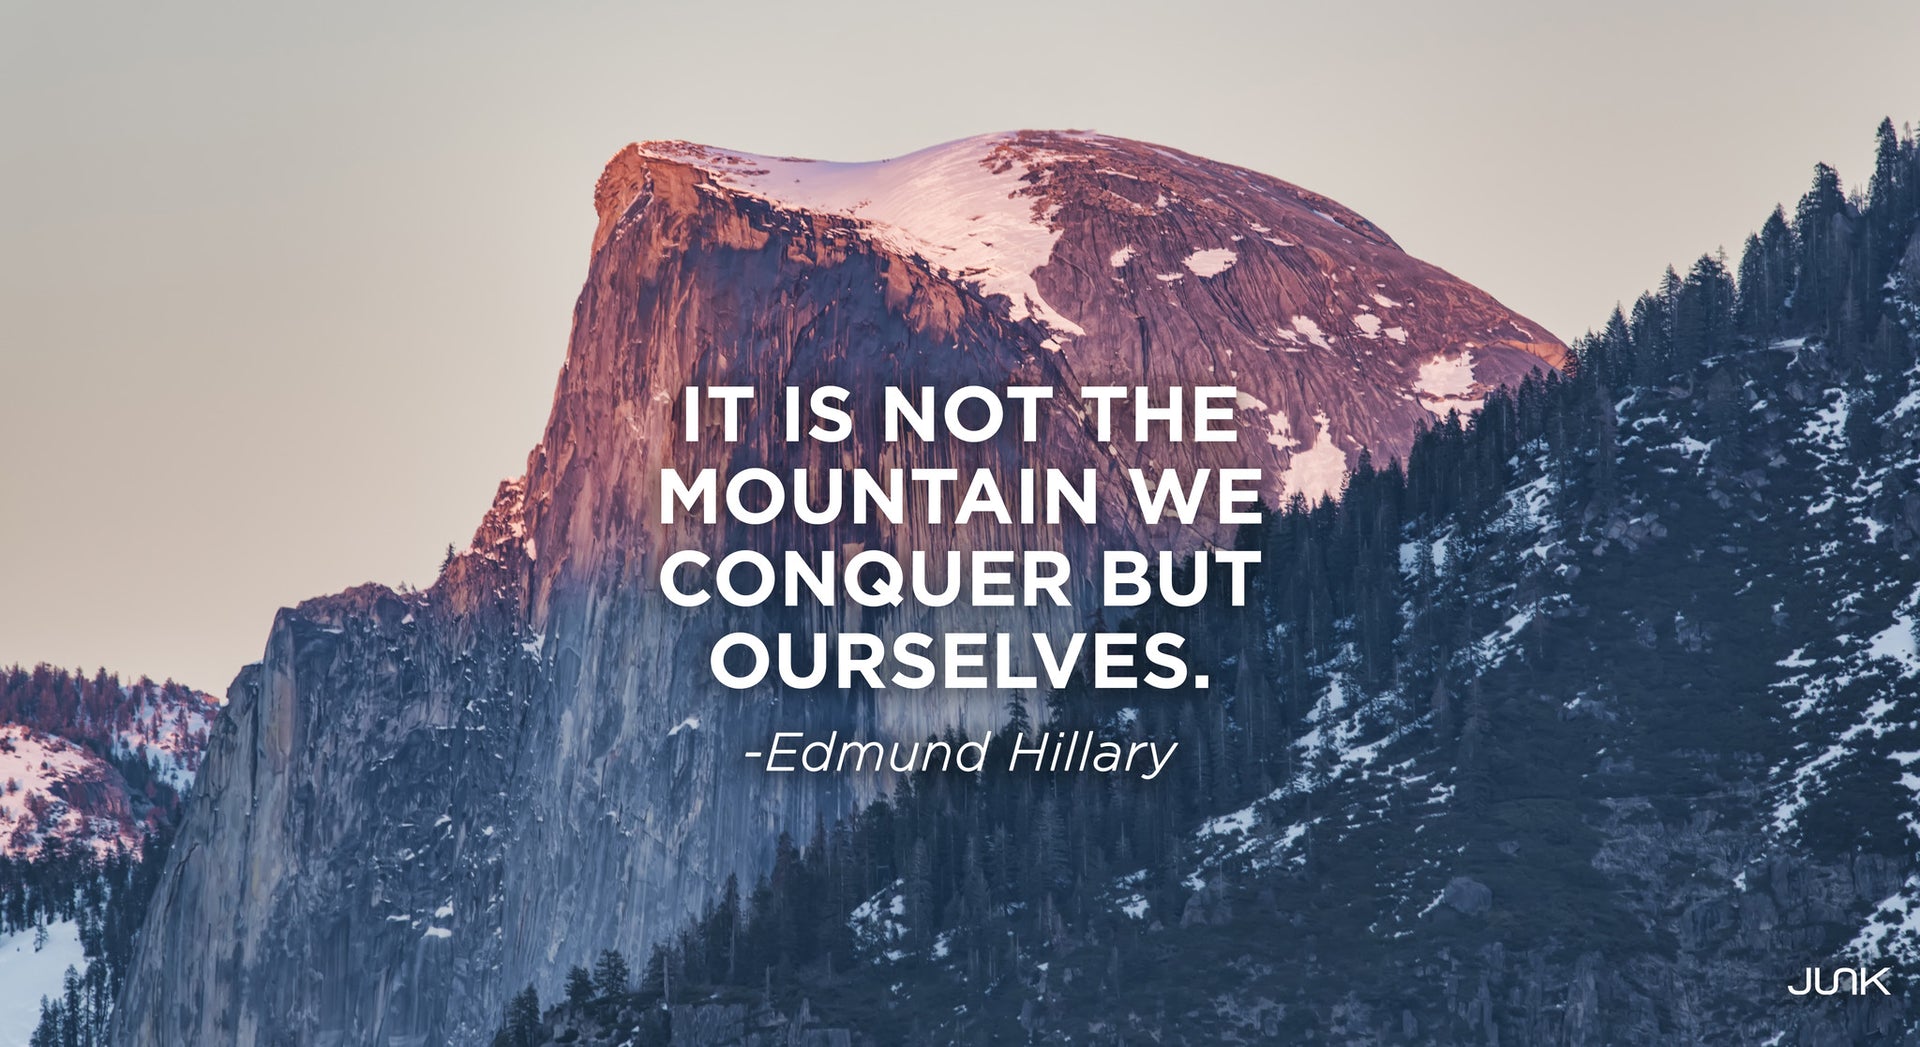 mountain range with quote reading it is not the mountain we conquer but ourselves